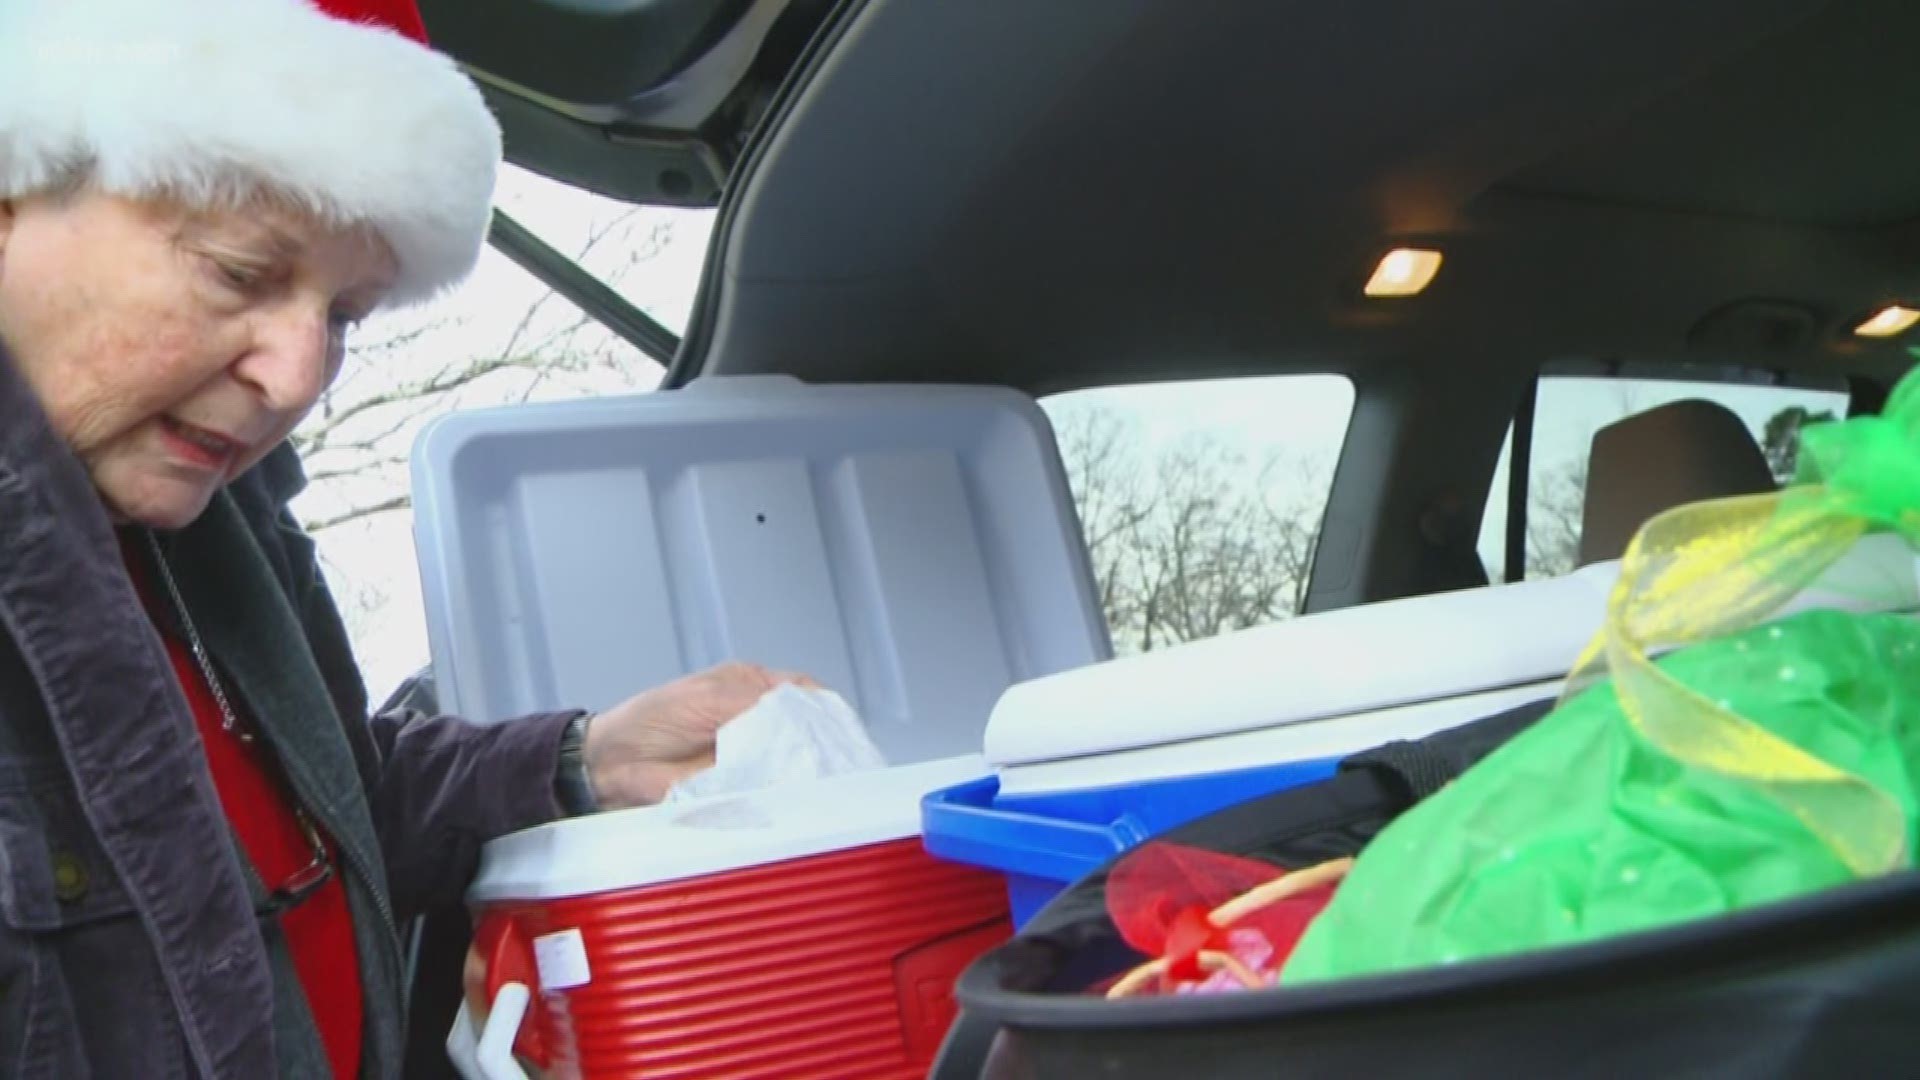 Mobile Meals set a holiday record in Knox County. Volunteers delivered 540 meals to home bound seniors.